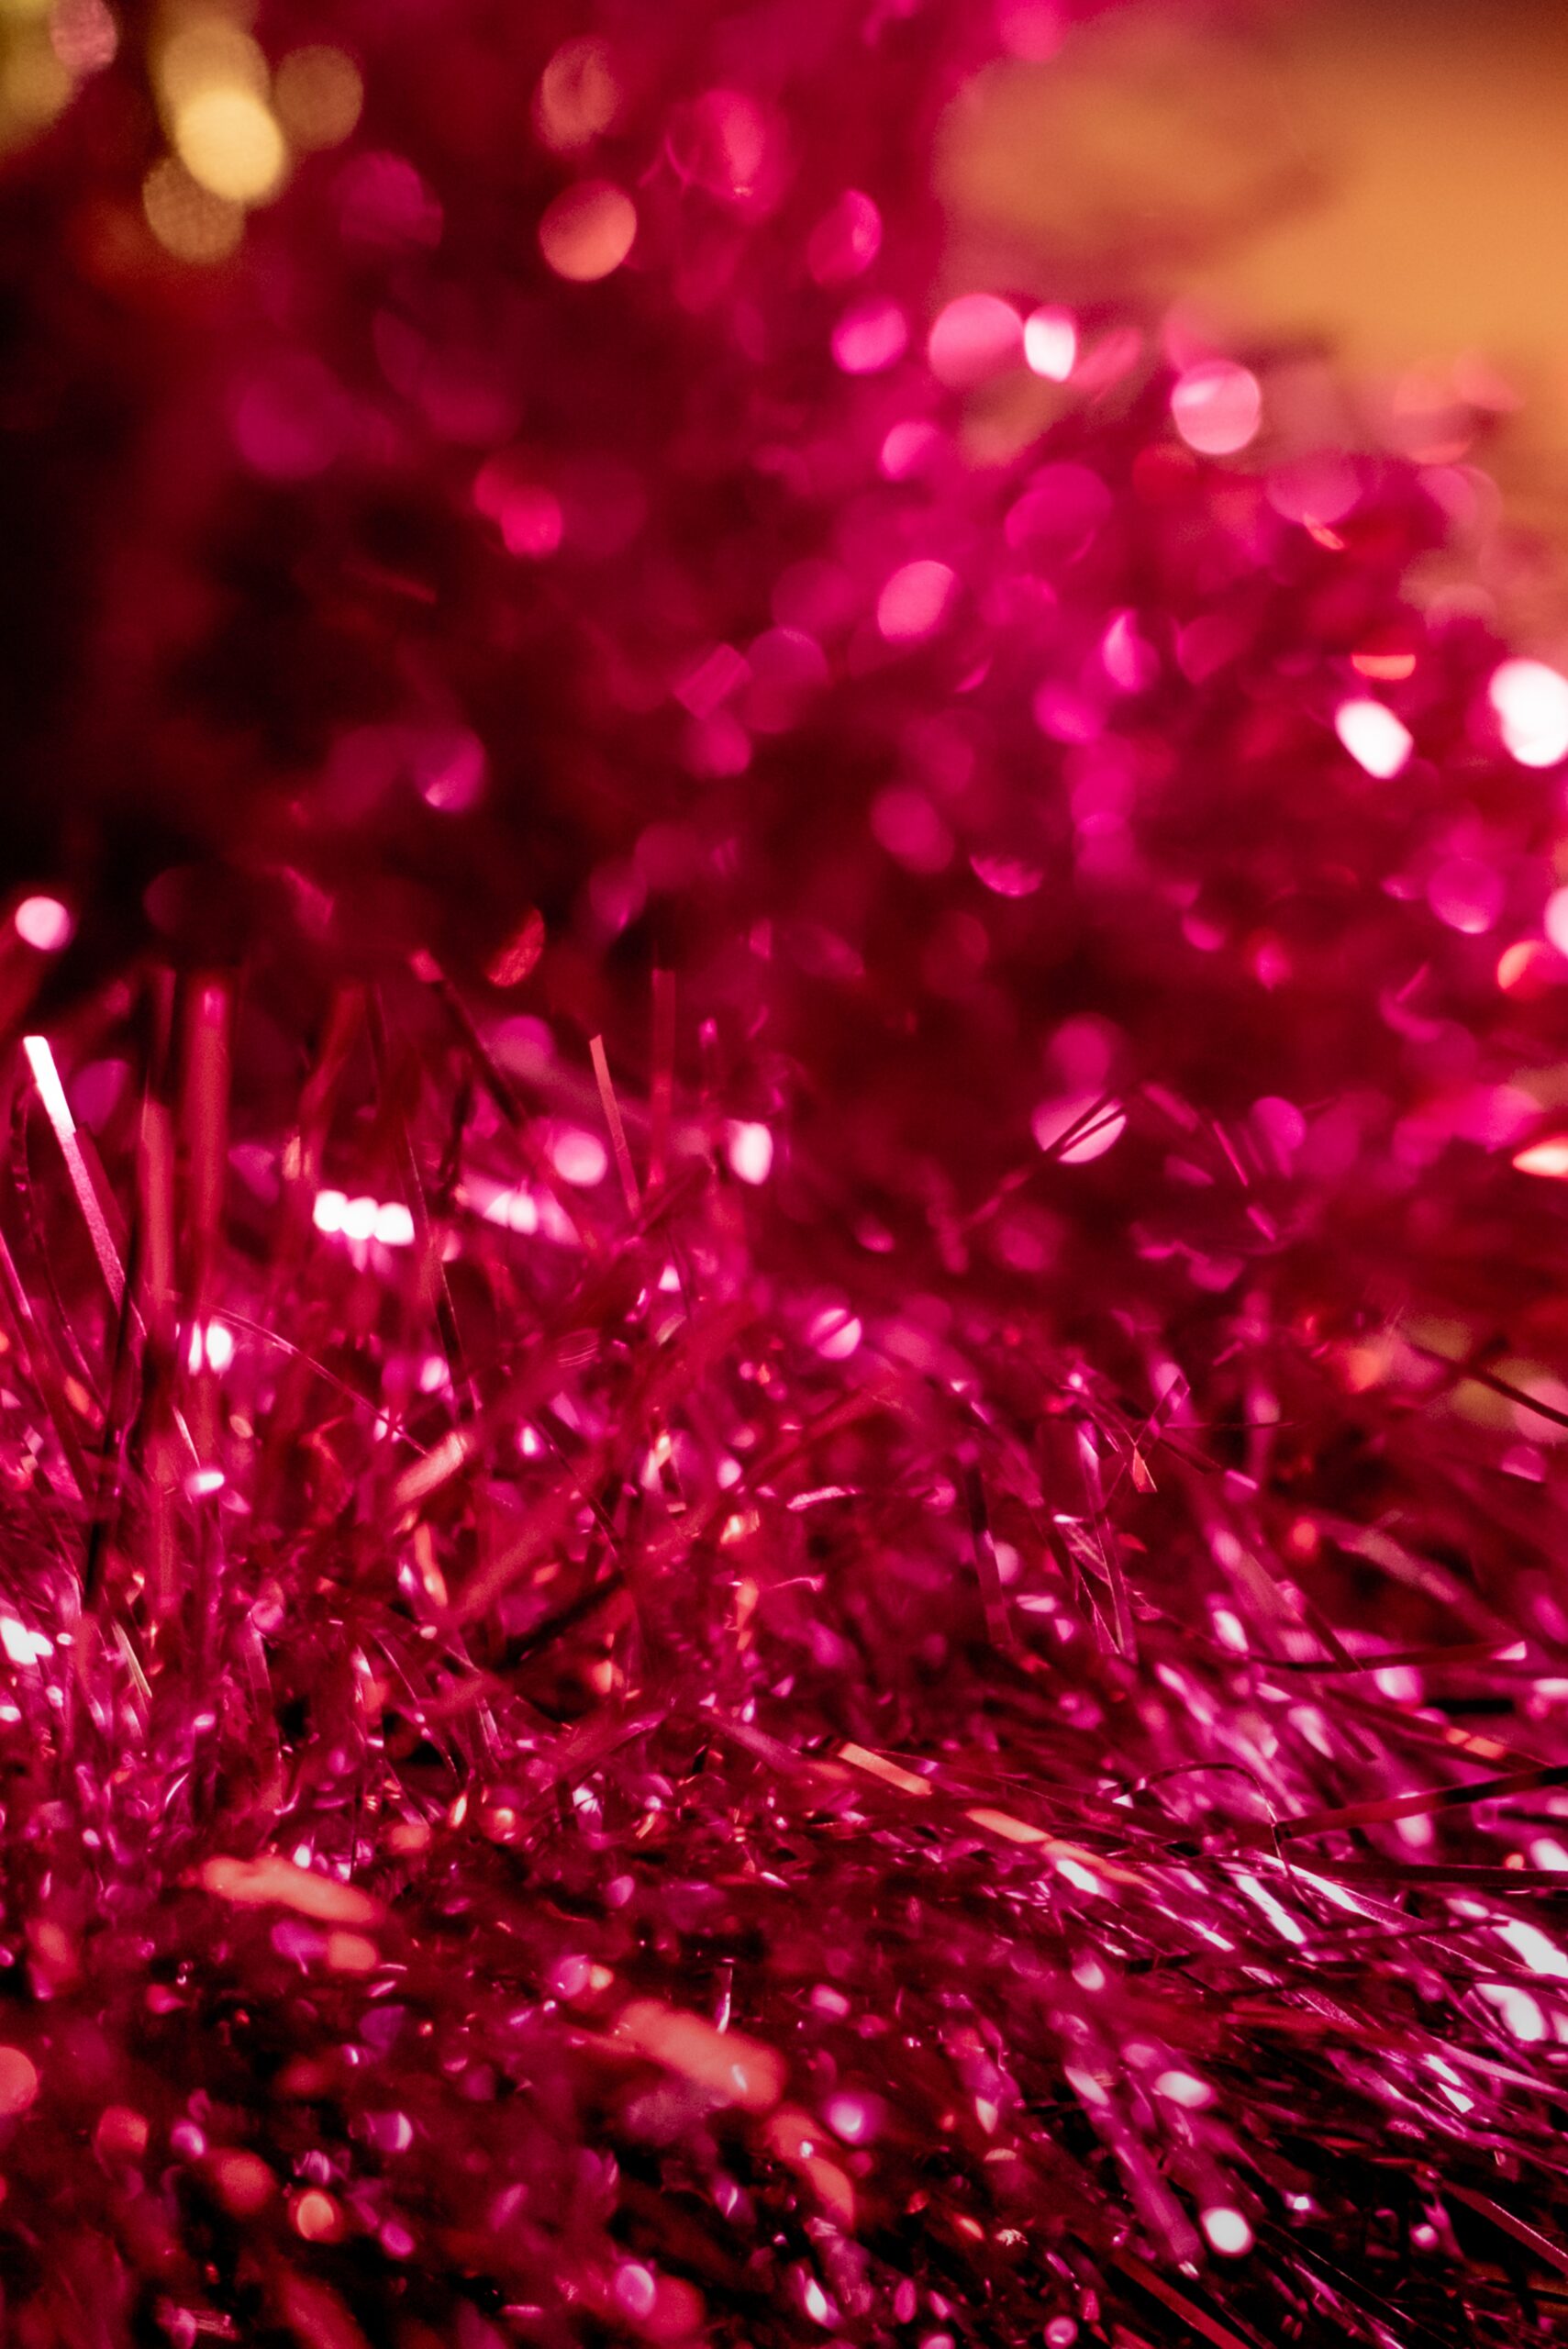 A close up of bright pink garland on a wooden table.